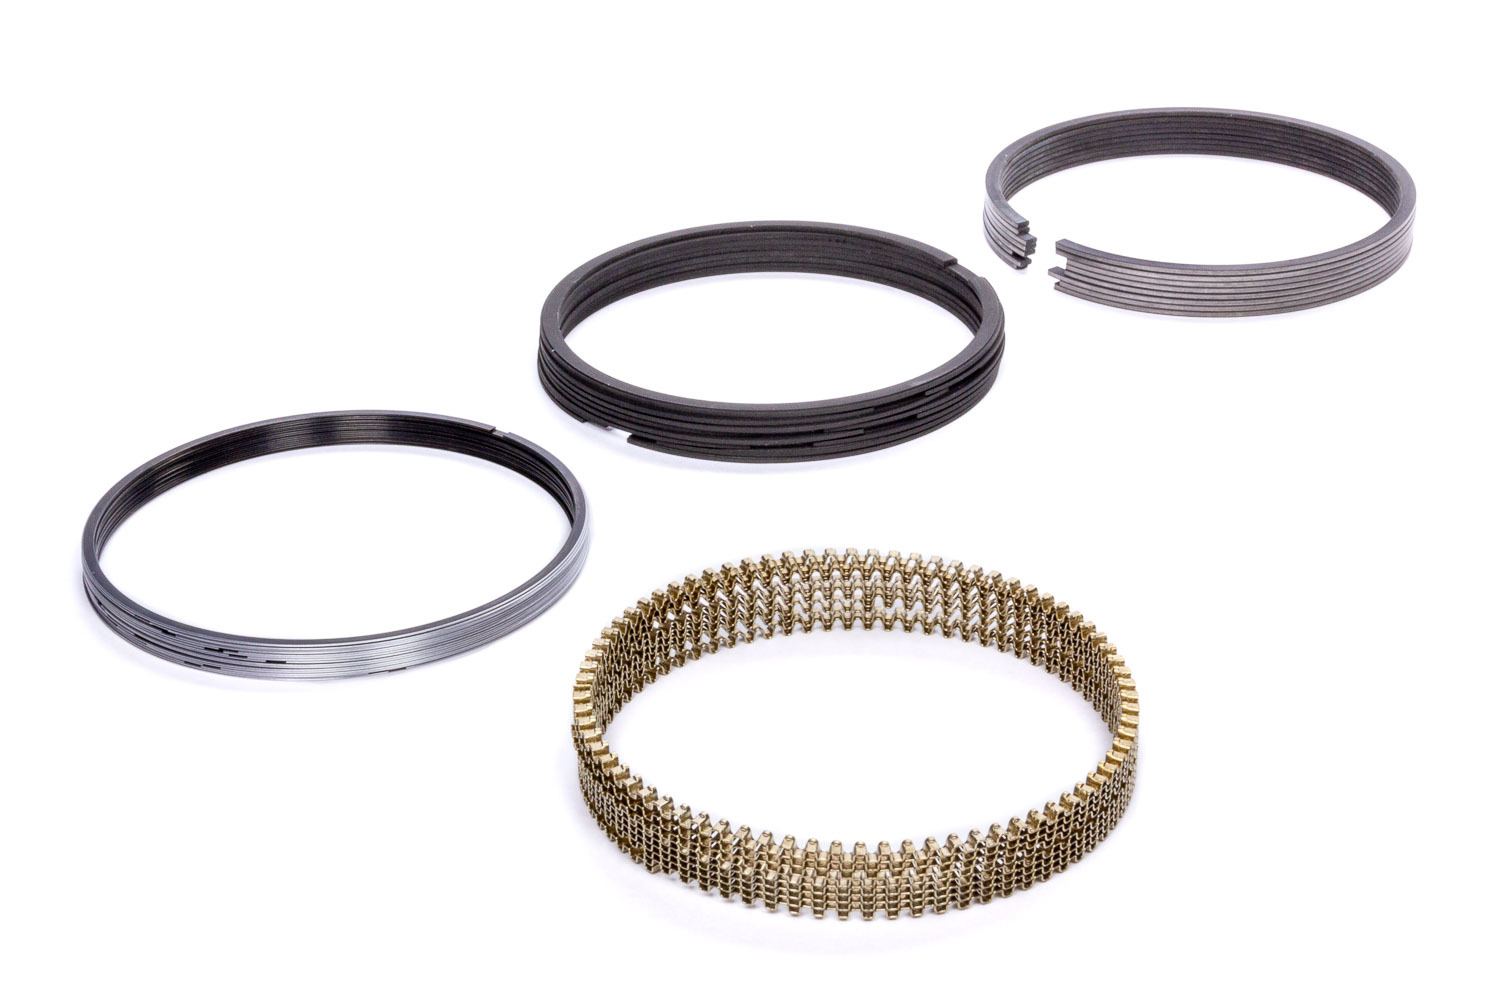 Hastings Piston Rings SM8565 Piston Rings, Racing Rings, 4.000 in Bore, Drop In, 1.5 x 1.5 x 3.0 mm Thick, Standard Tension, Steel, Plasma Moly, 8-Cylinder, Kit